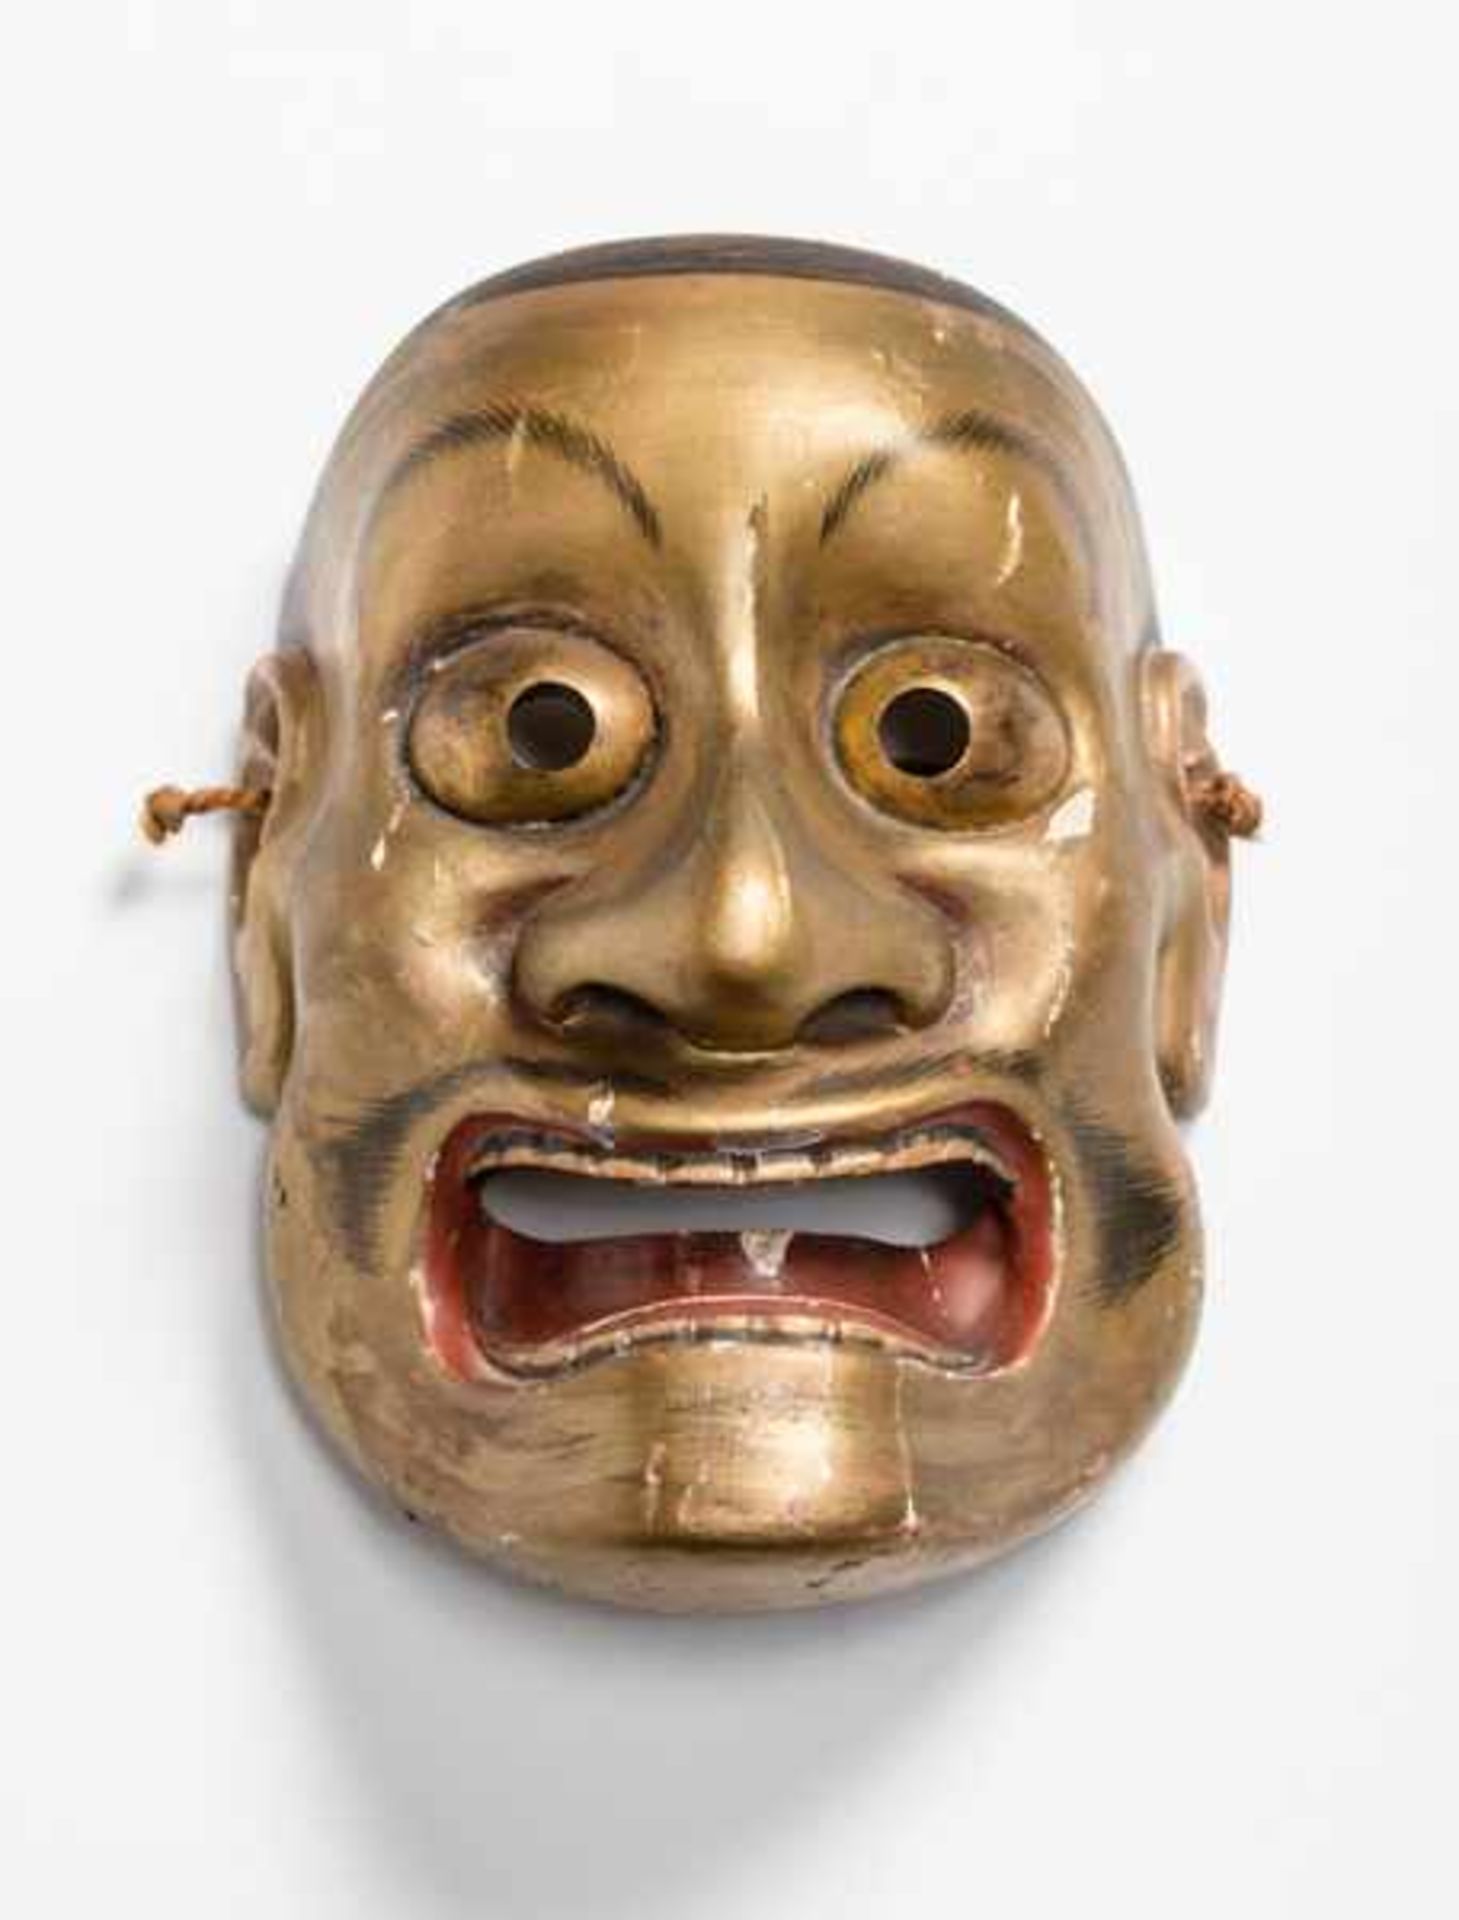 A NOH MASK OF OTOBIDE (HORNLESS DEMON) Wood, gesso, pigments and gilt metal. Japan, Edo period, 17th